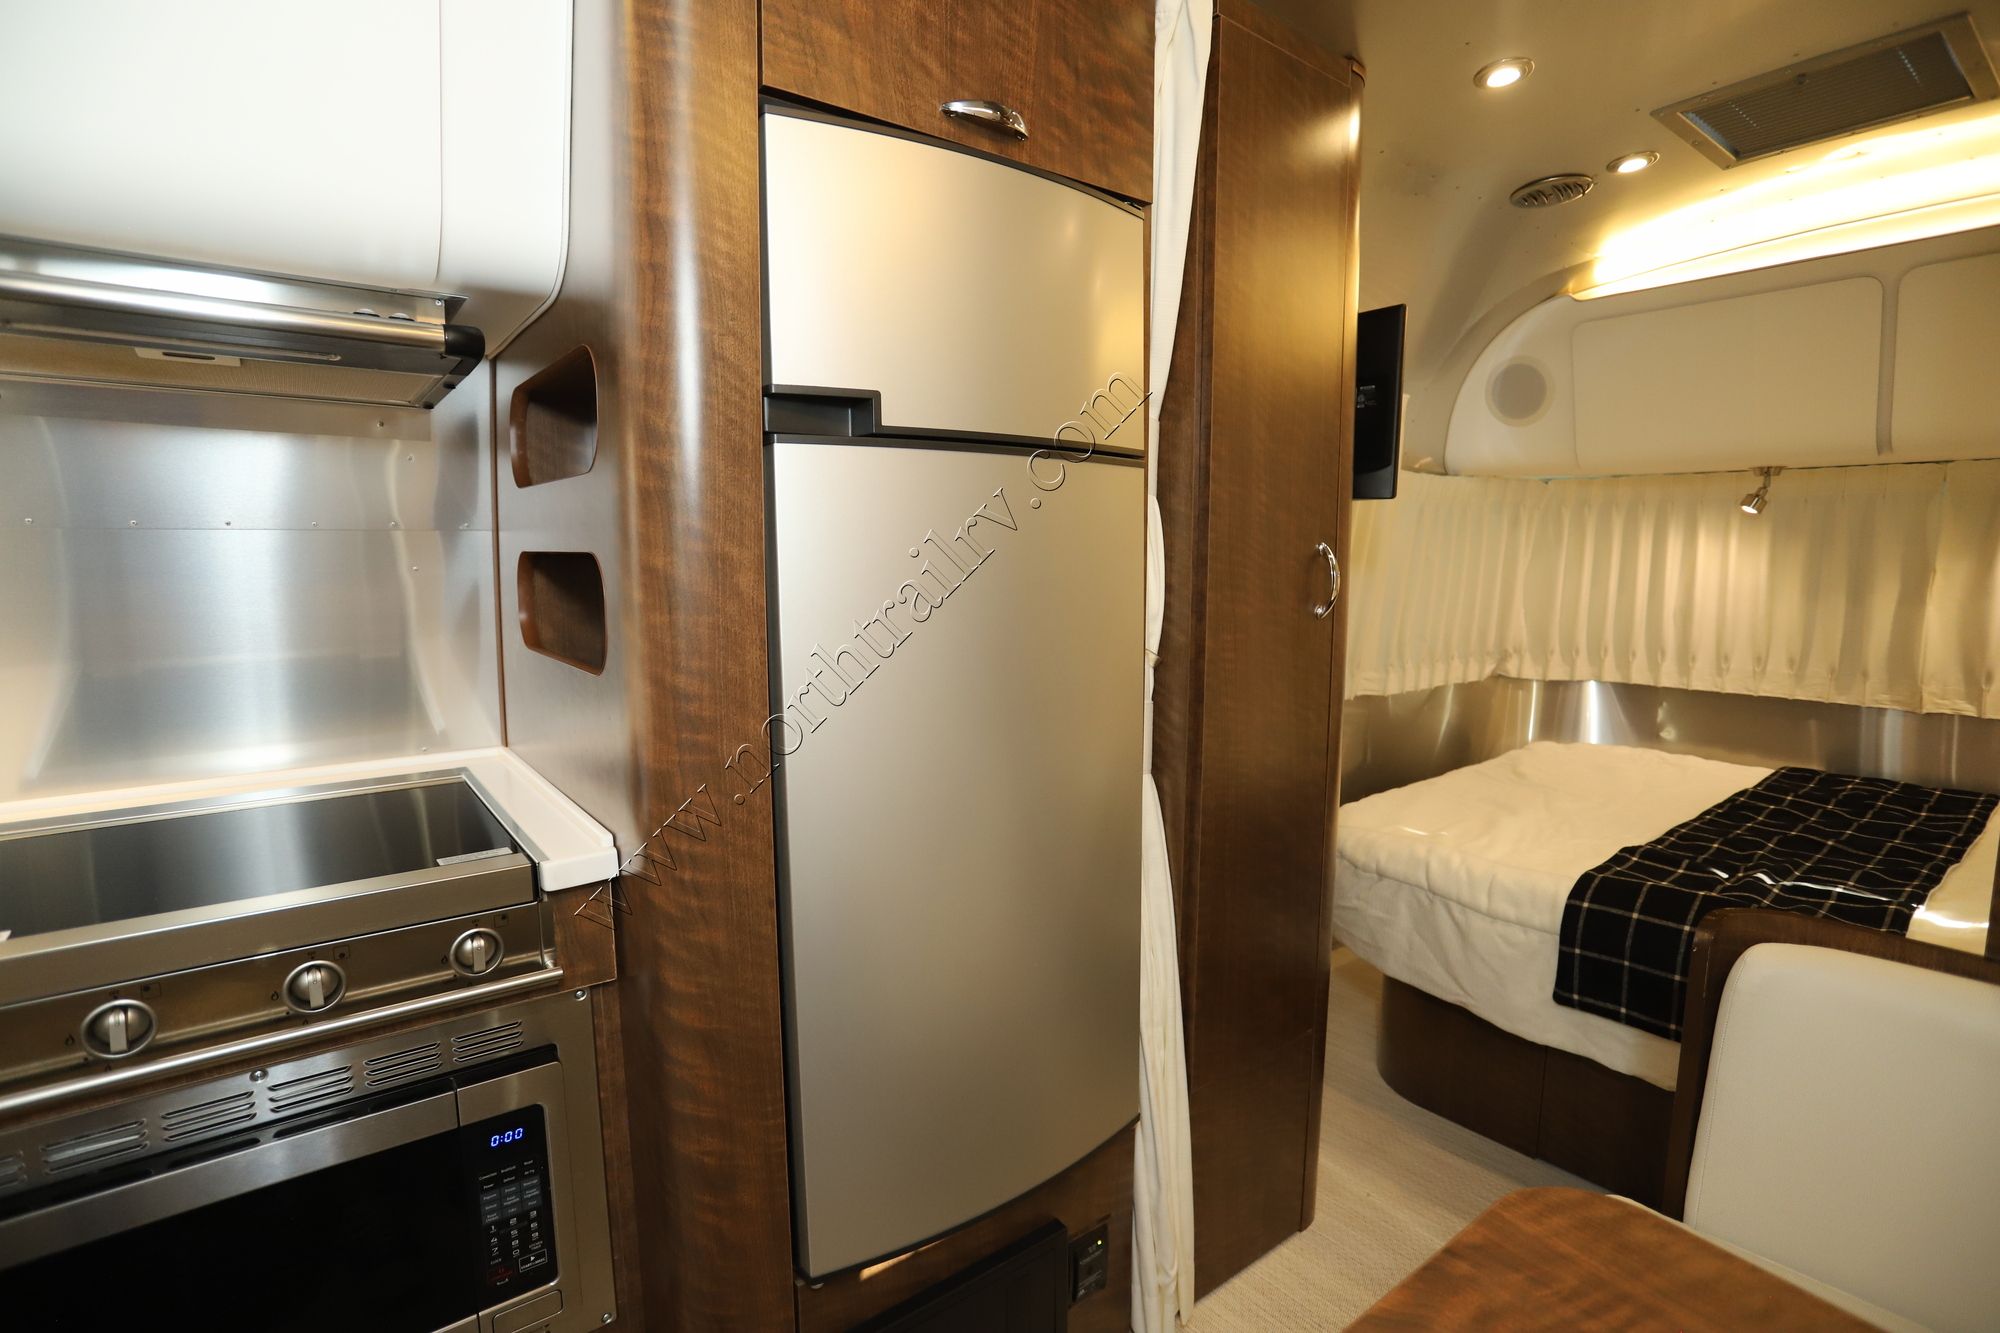 Used 2020 Airstream Globetrotter 23FB Travel Trailer  For Sale